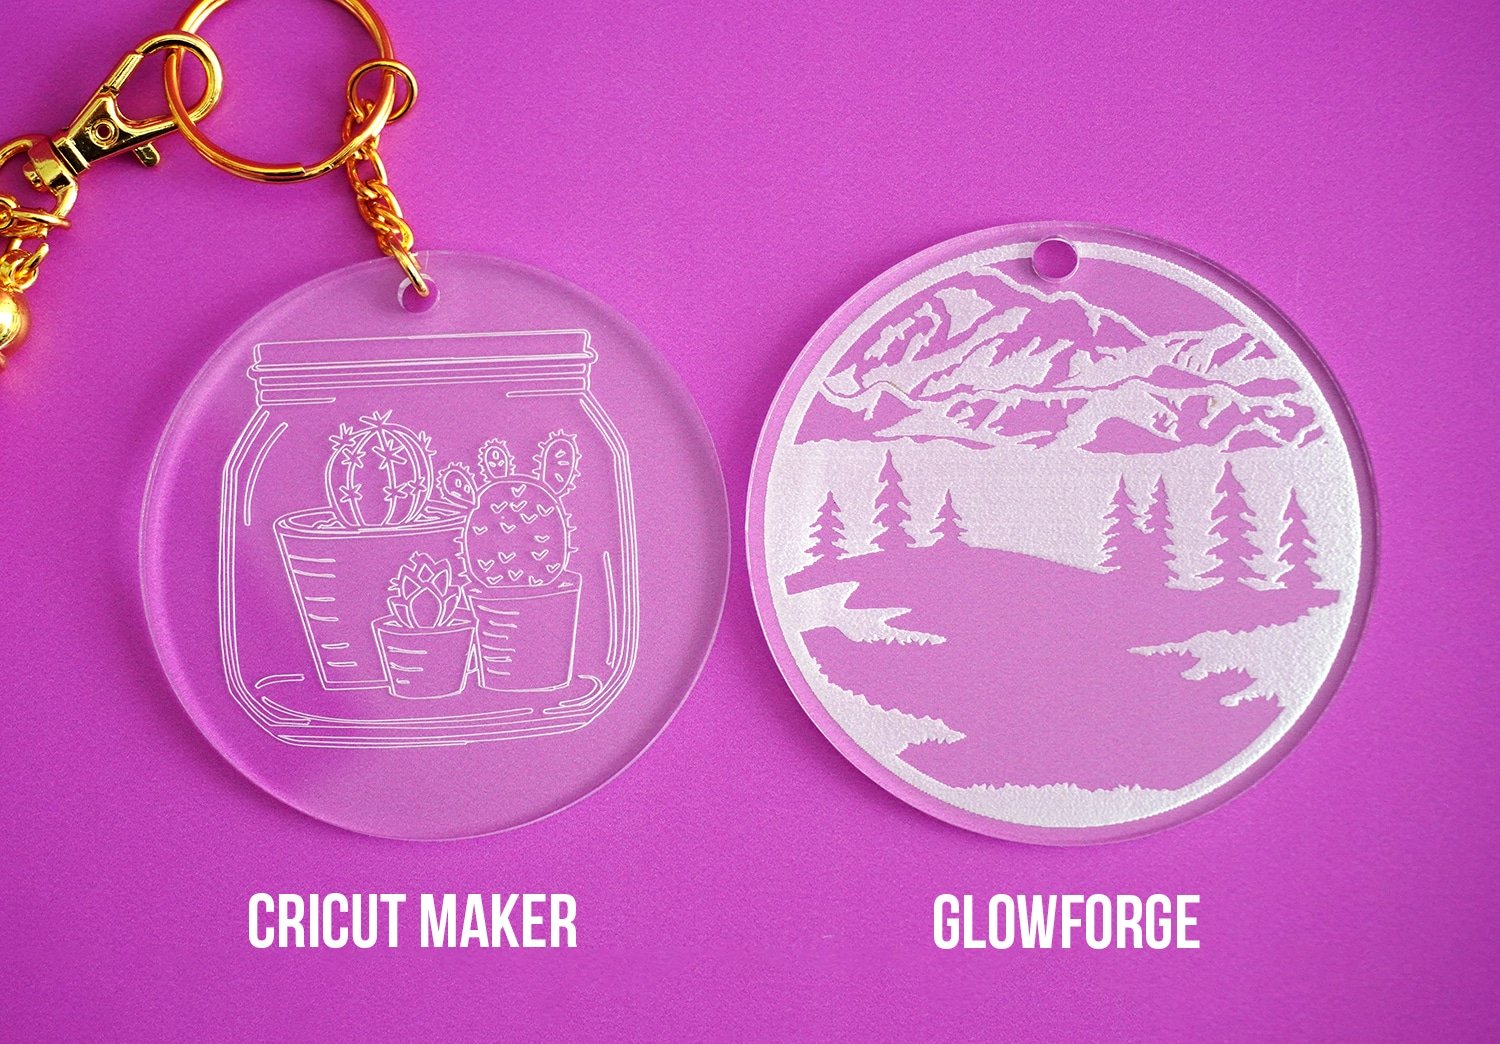 difference between two projects engraving cricut maker vs glowforge, glowforge appears to have more clarity